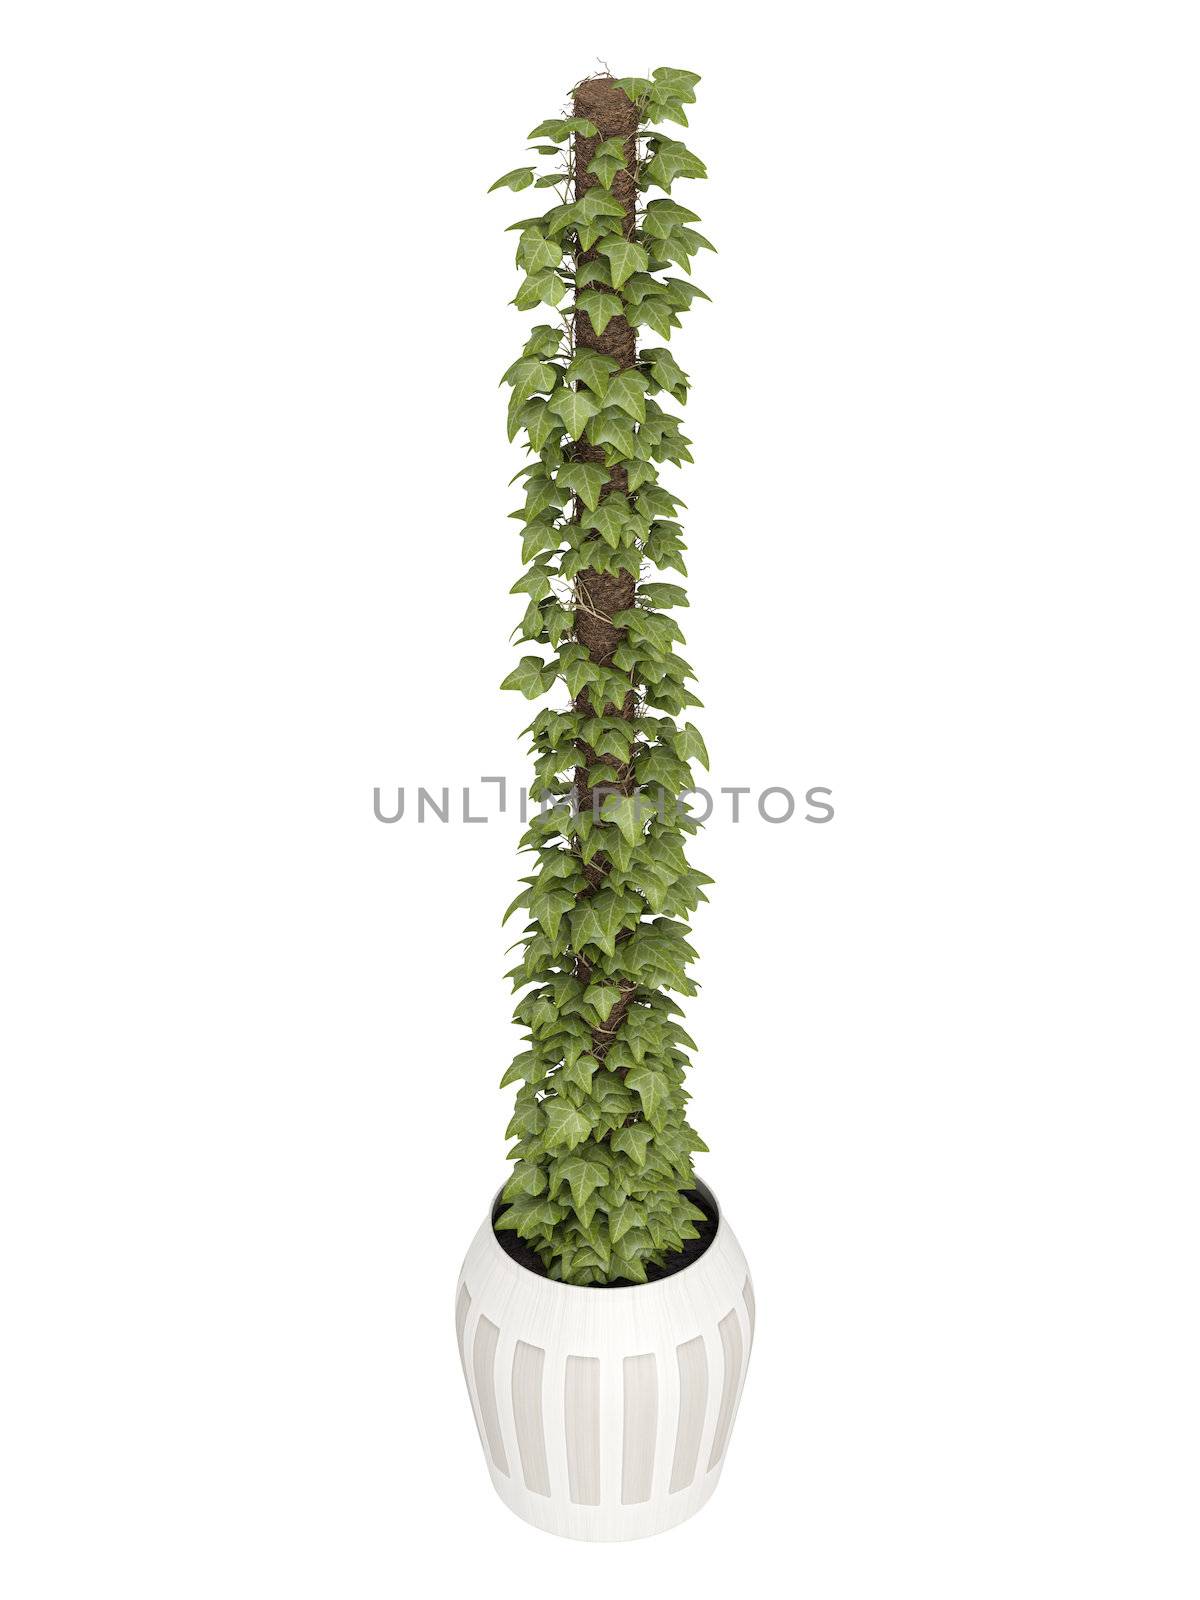 Ivy creeper grown as a houseplant covering a support in a ceramic container isolated on white